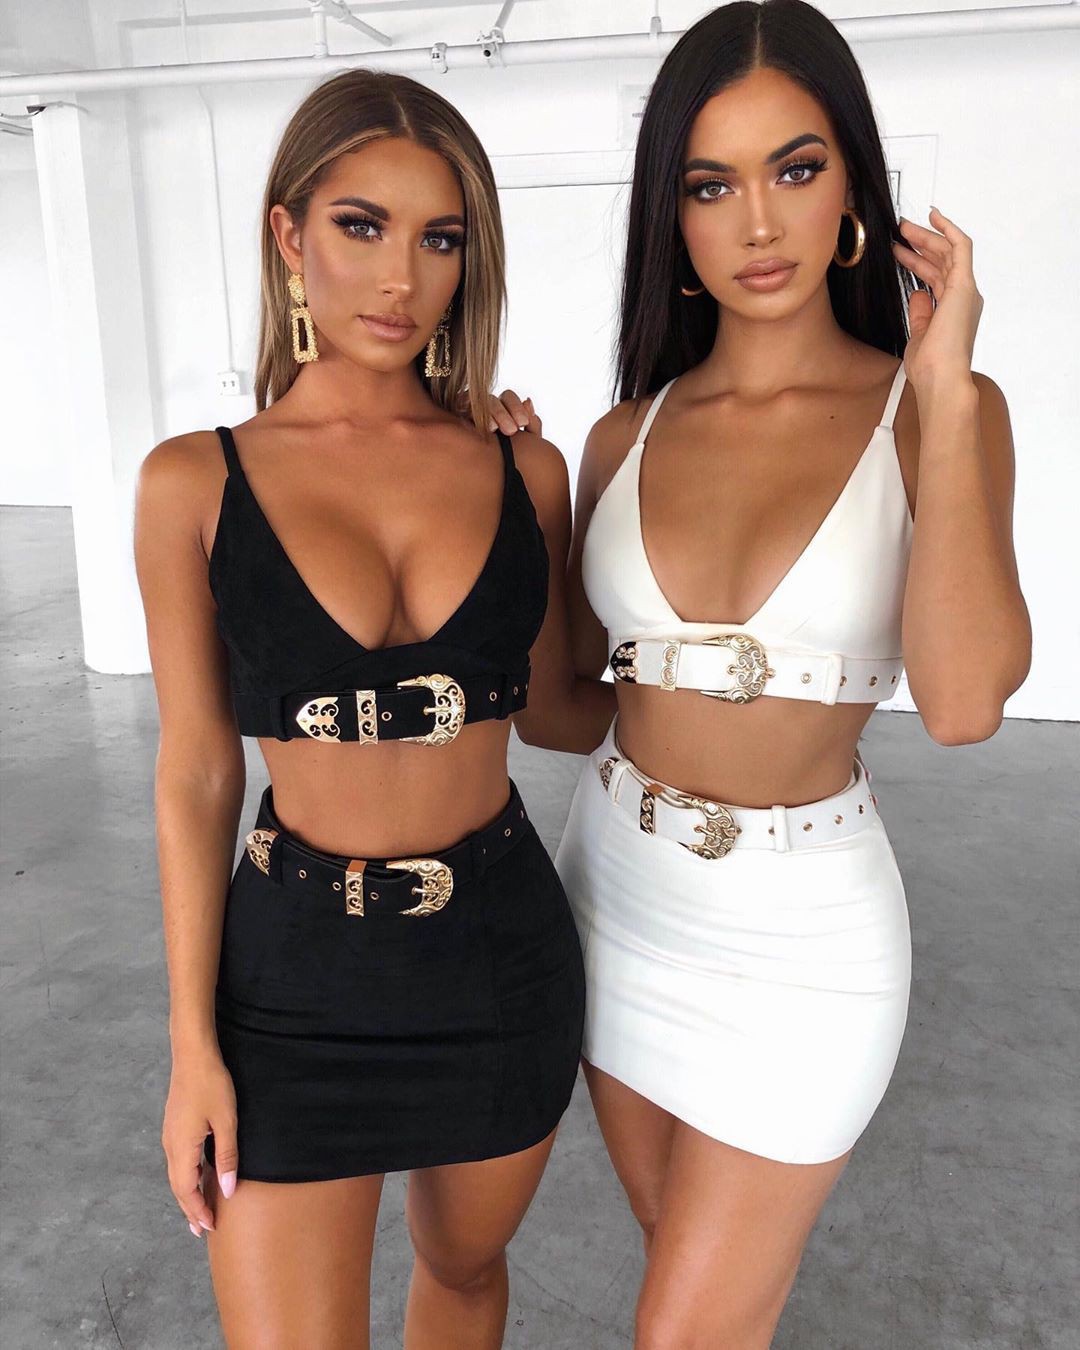 Black or white? Party Outfit Dress: Girls Outfit,  party outfits,  Outfit Ideas,  Black,  Dresses Ideas,  Party Dresses,  White Outfit,  Hot Party Attire  